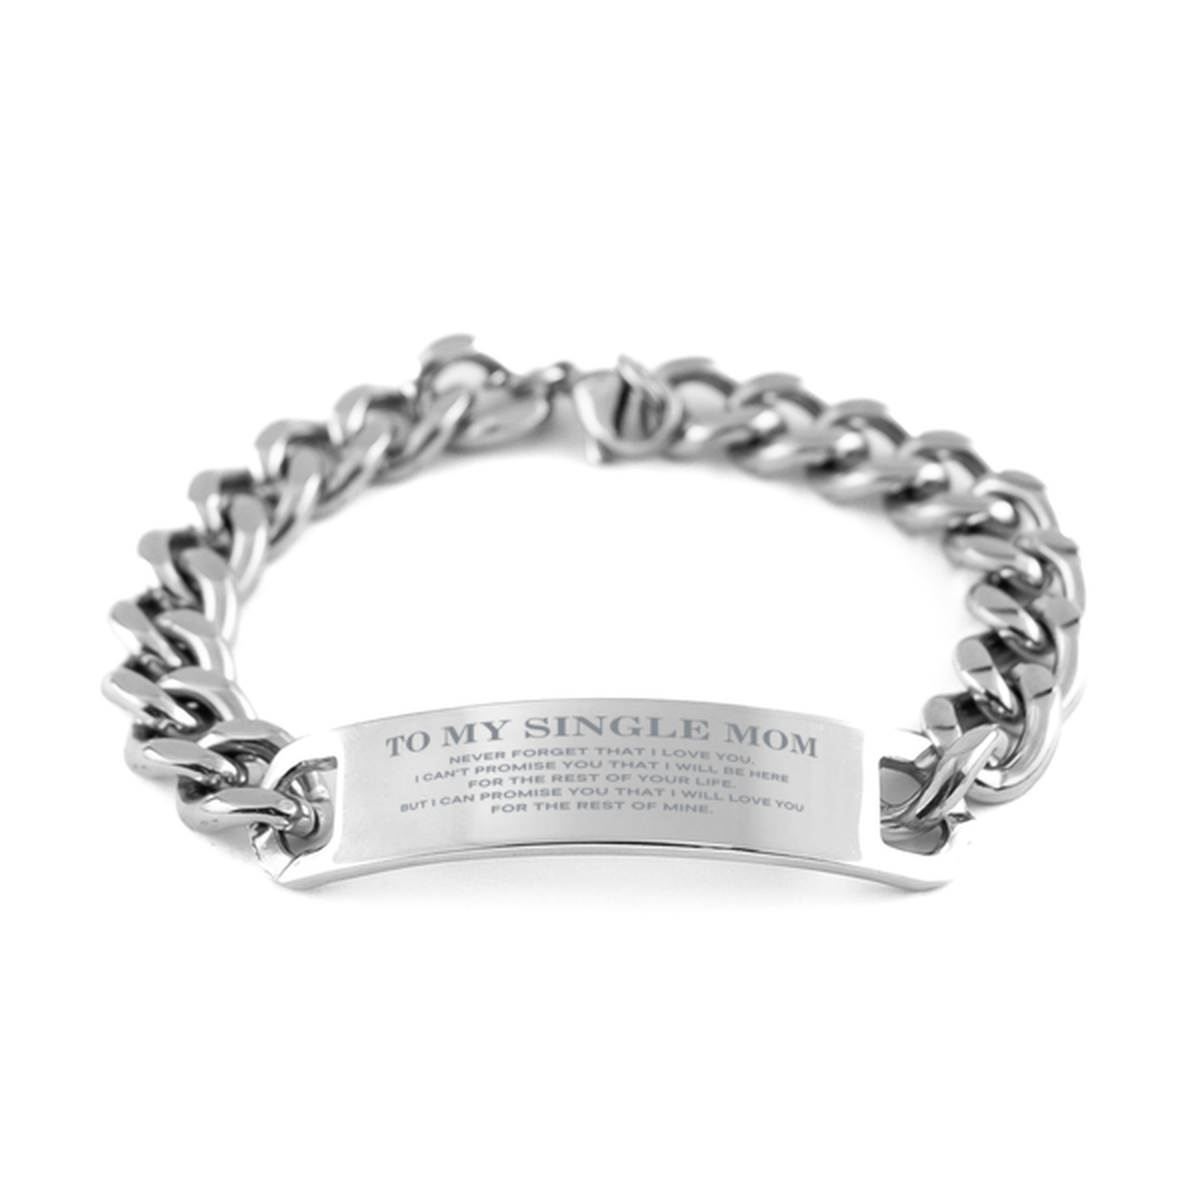 To My Single Mom Gifts, I will love you for the rest of mine, Love Single Mom Bracelet, Birthday Christmas Unique Cuban Chain Stainless Steel Bracelet For Single Mom